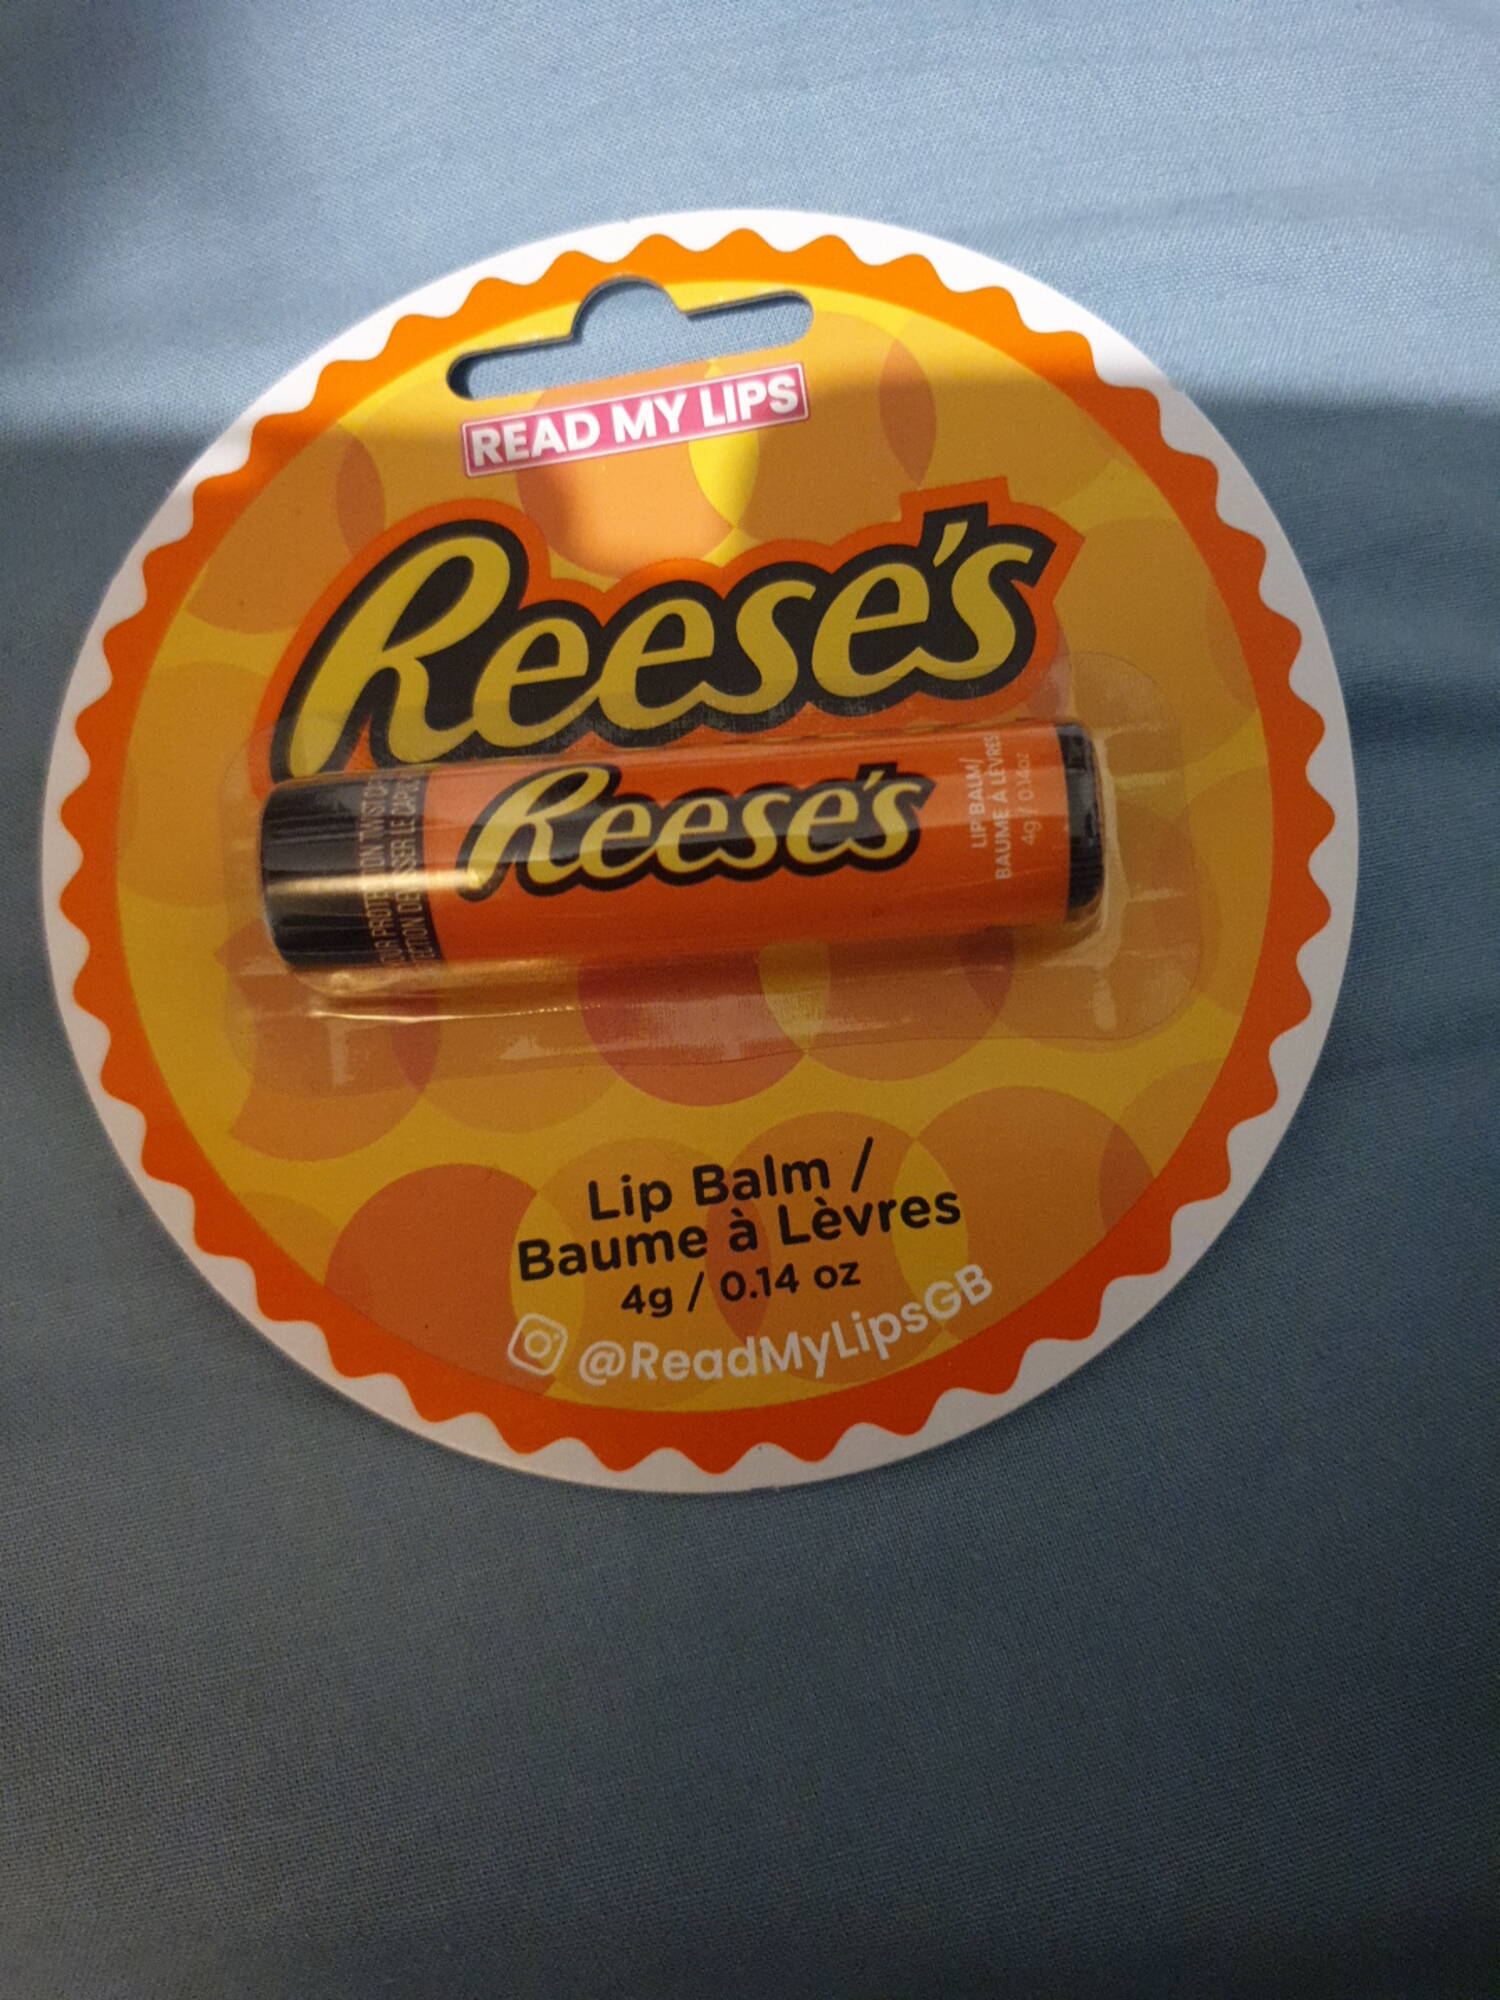 REESE'S - Read my lips - Baume à lèvres